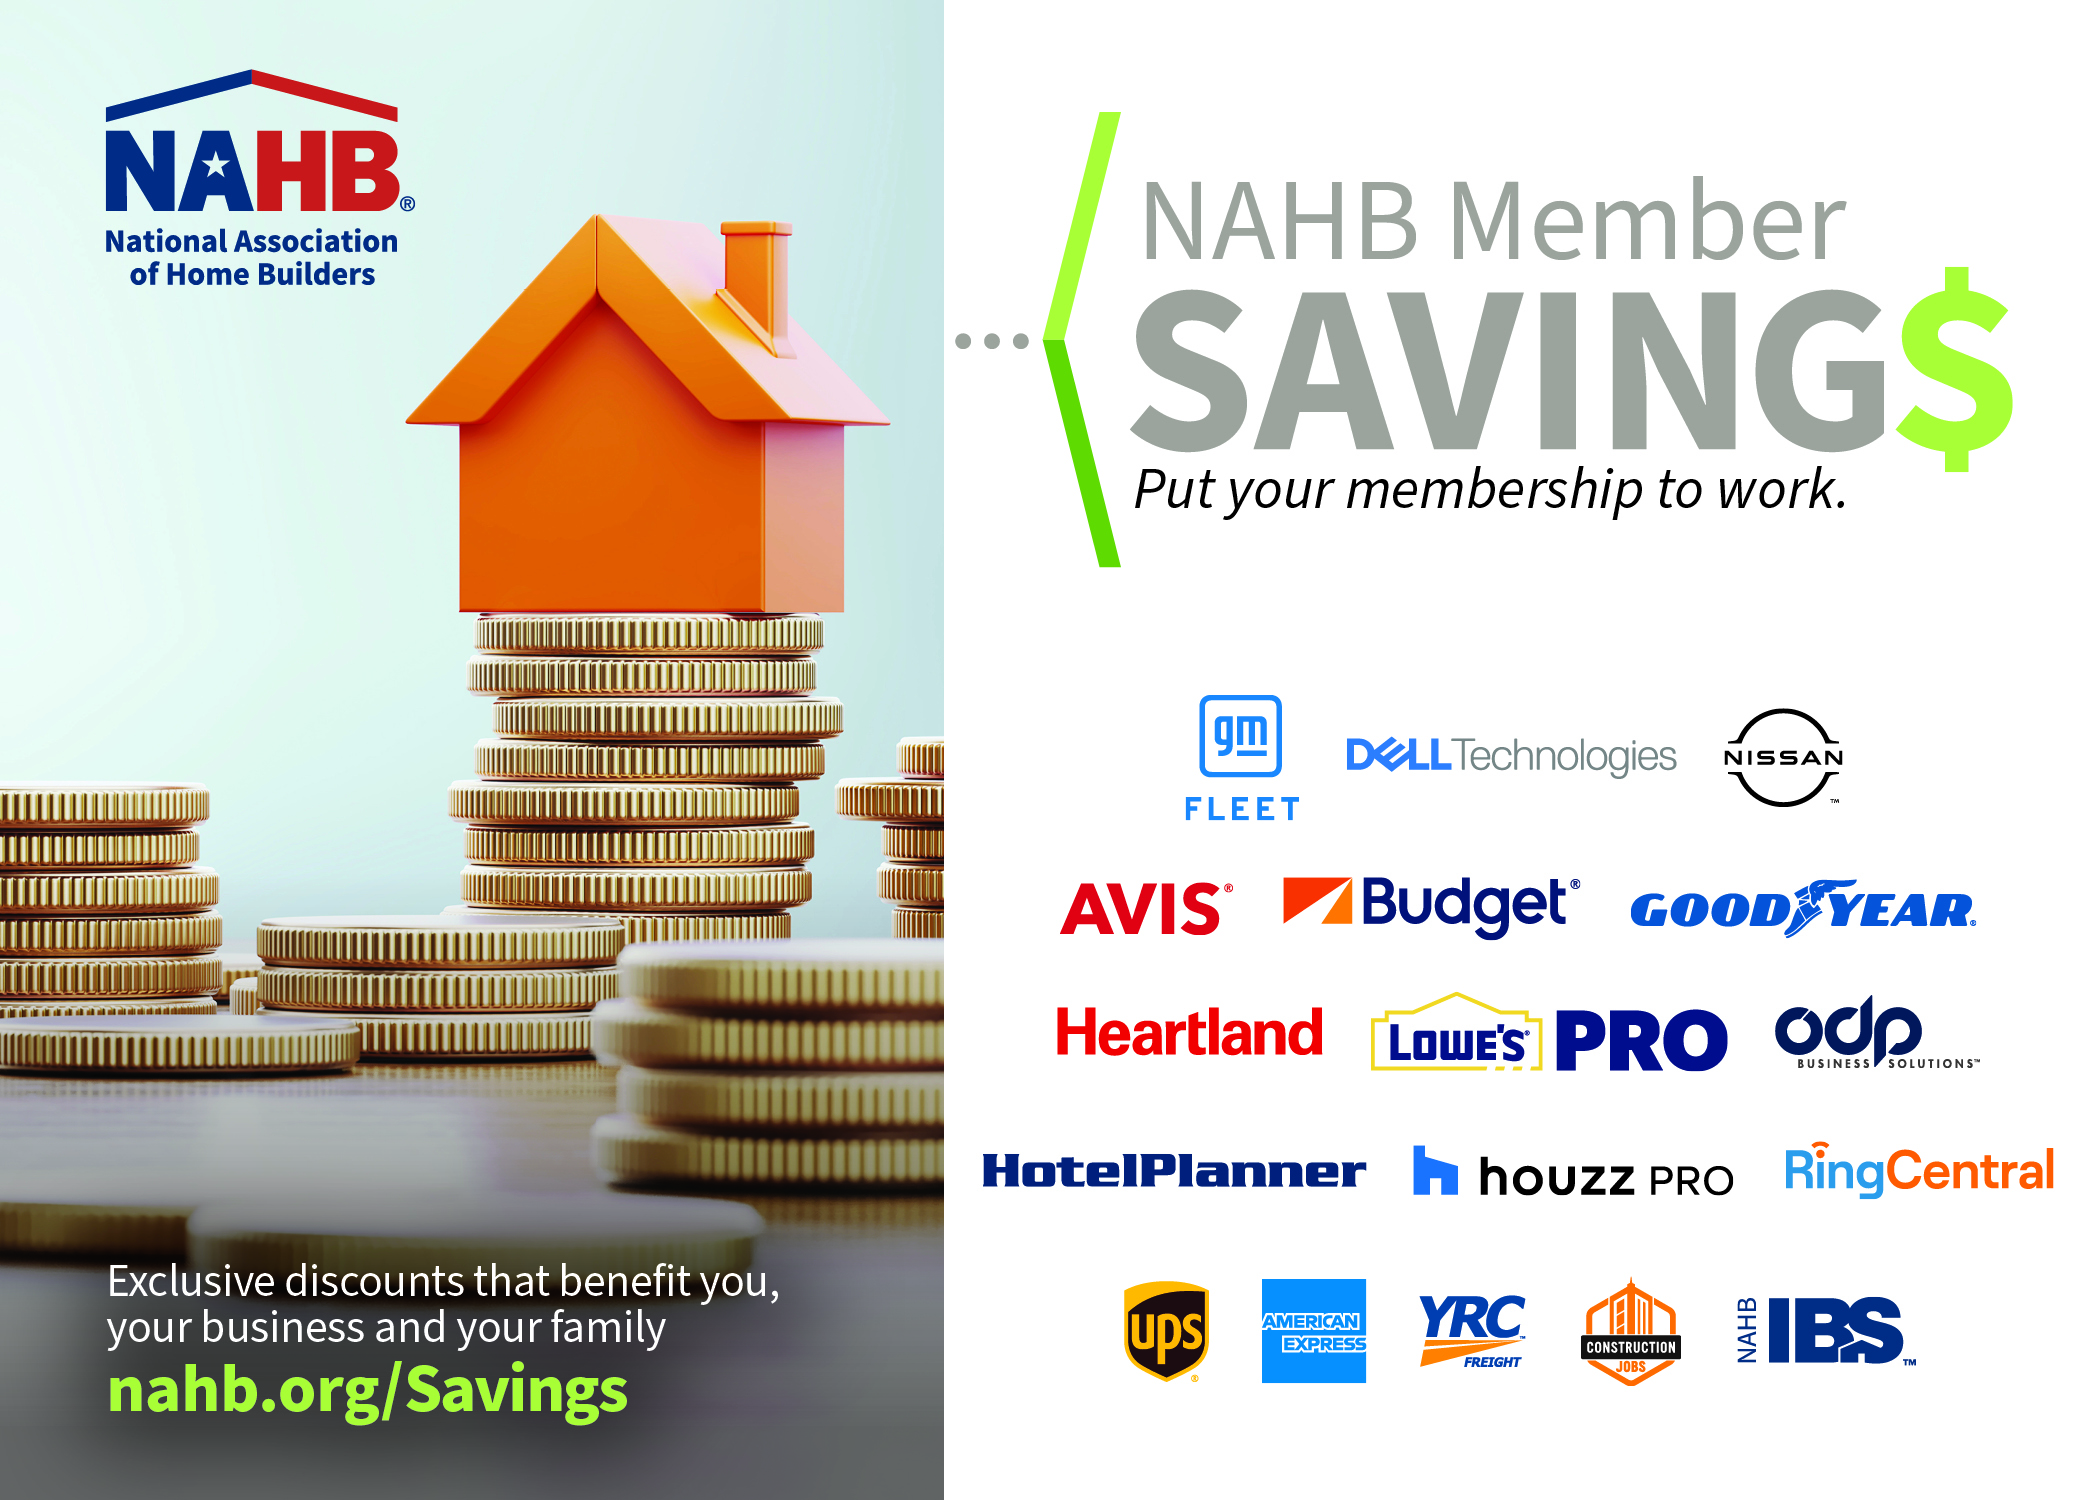 NAHB Member Savings $ Put your membership to work. Exclusive discounts that benfit you, your business and your family. nahb.org/Savings